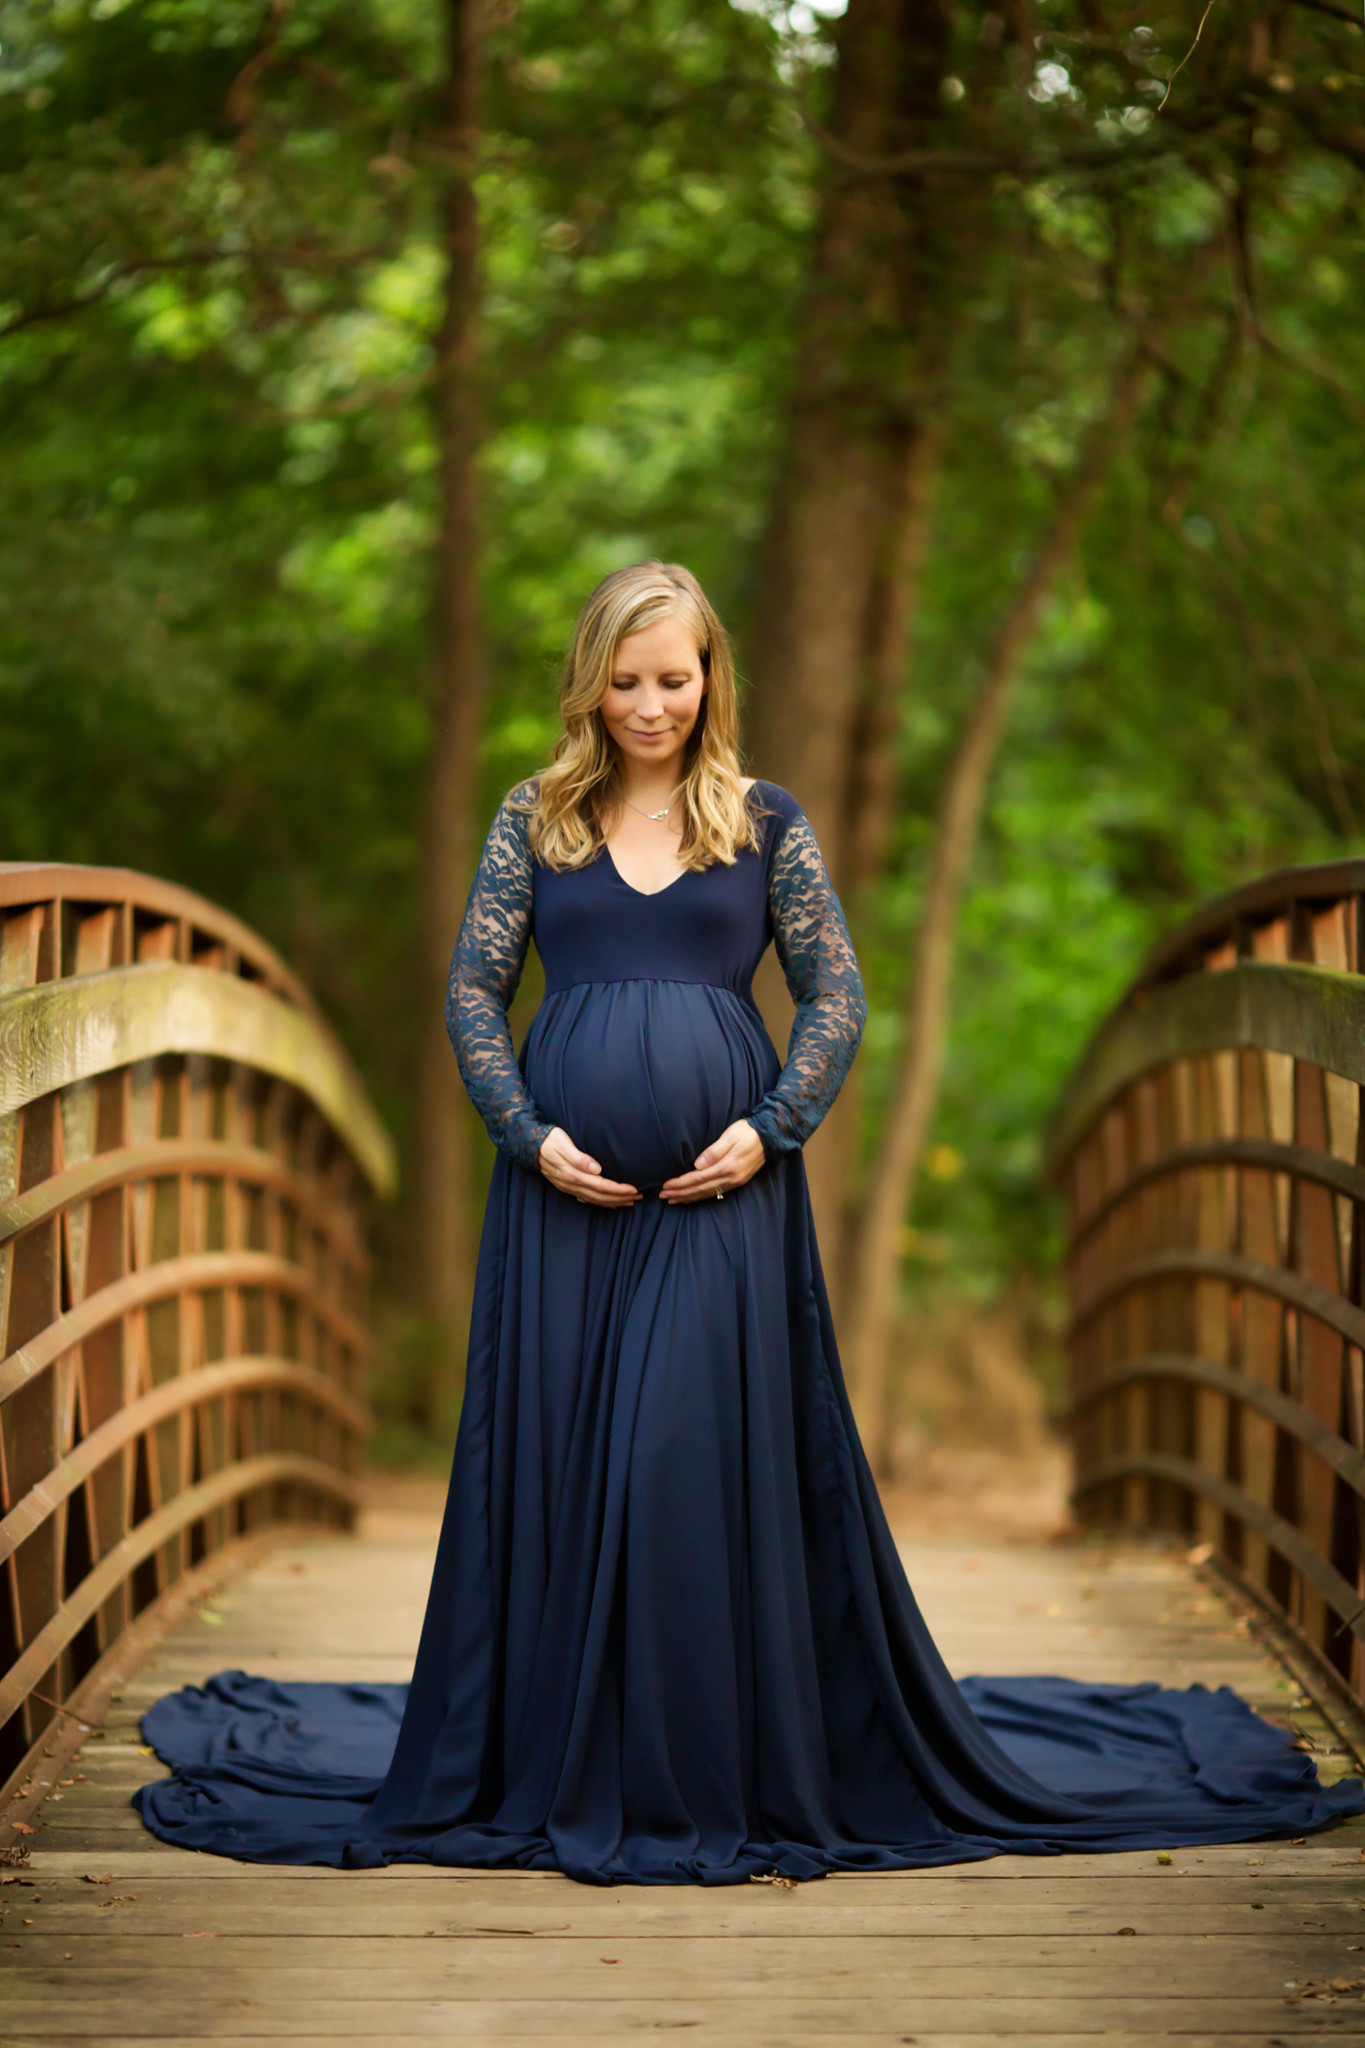 Flowy Maxi Dress . 1 Hottest 25 Maternity Photoshoot Outfit Ideas - 1